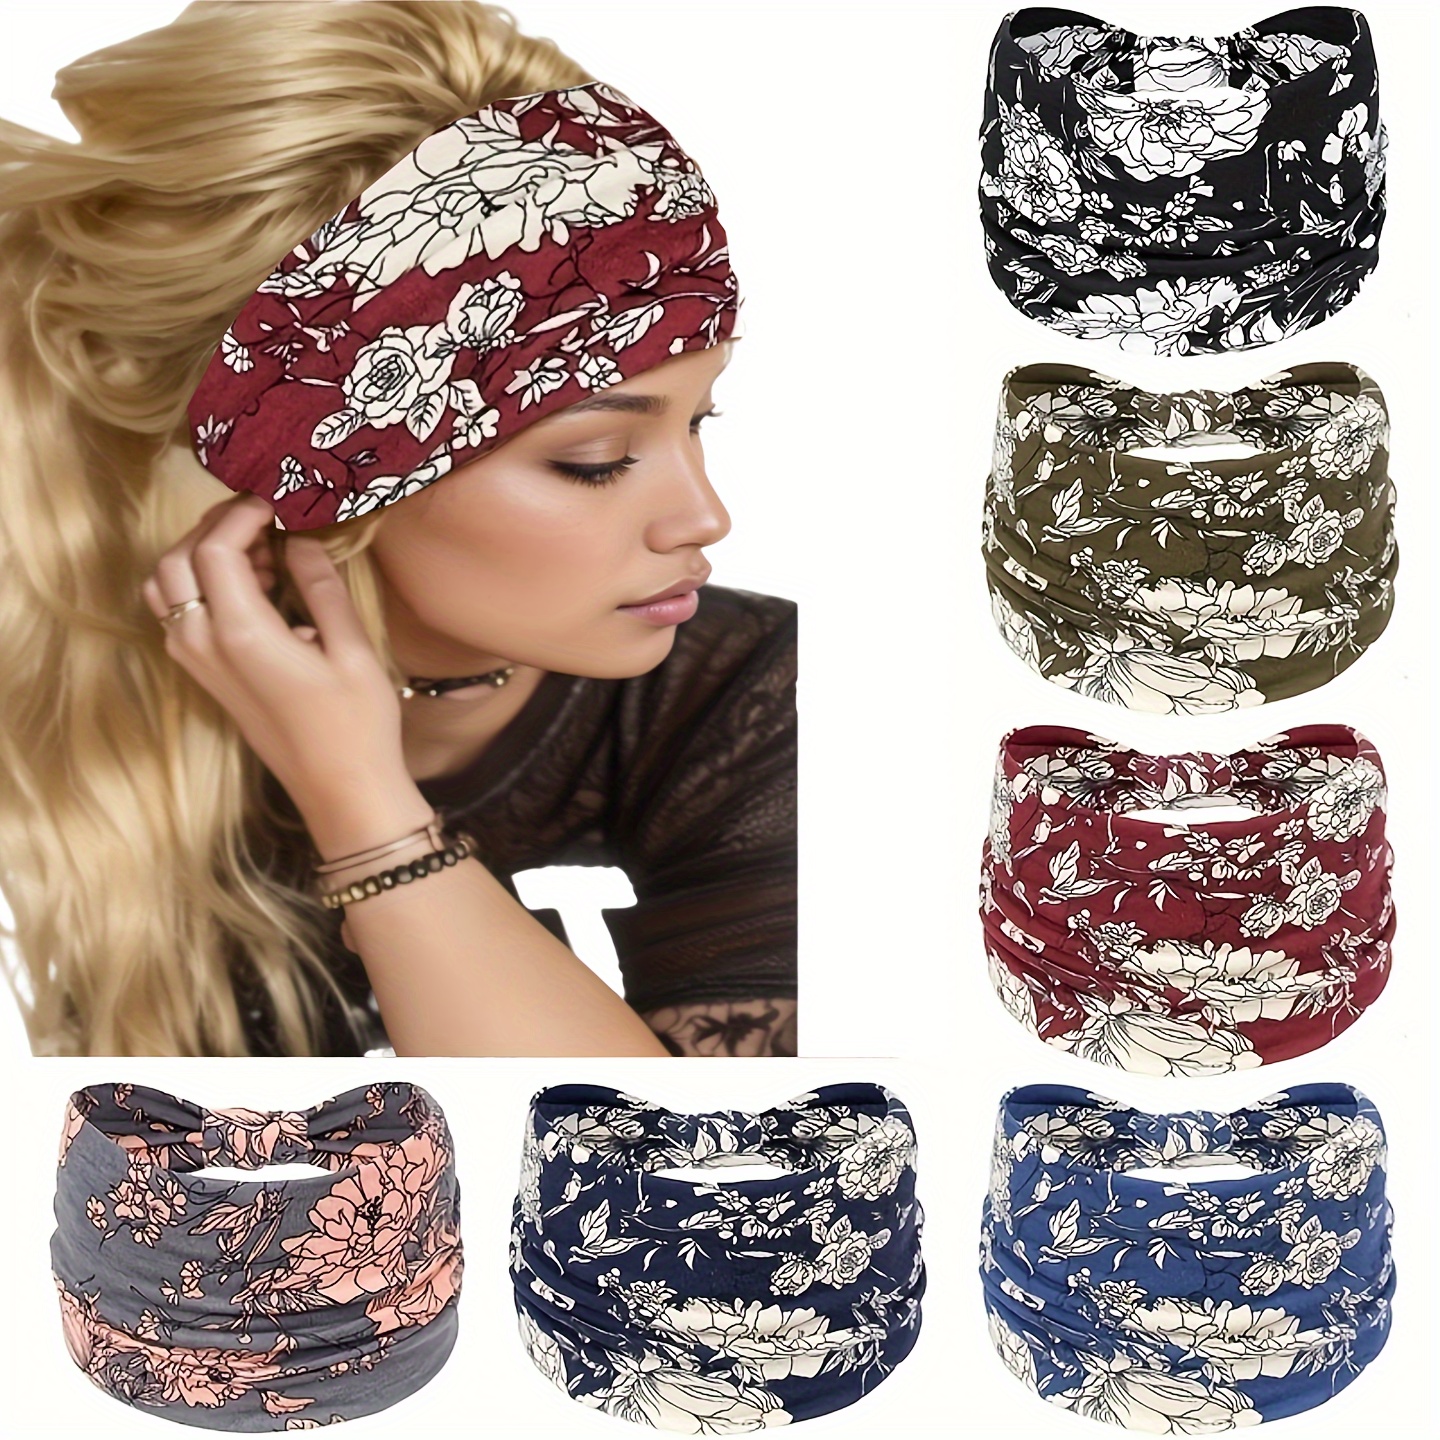 

6-piece Boho Style Headbands: Rose Printed, Large, Knit Headbands For Yoga, Running, And More - Cotton Blend Material